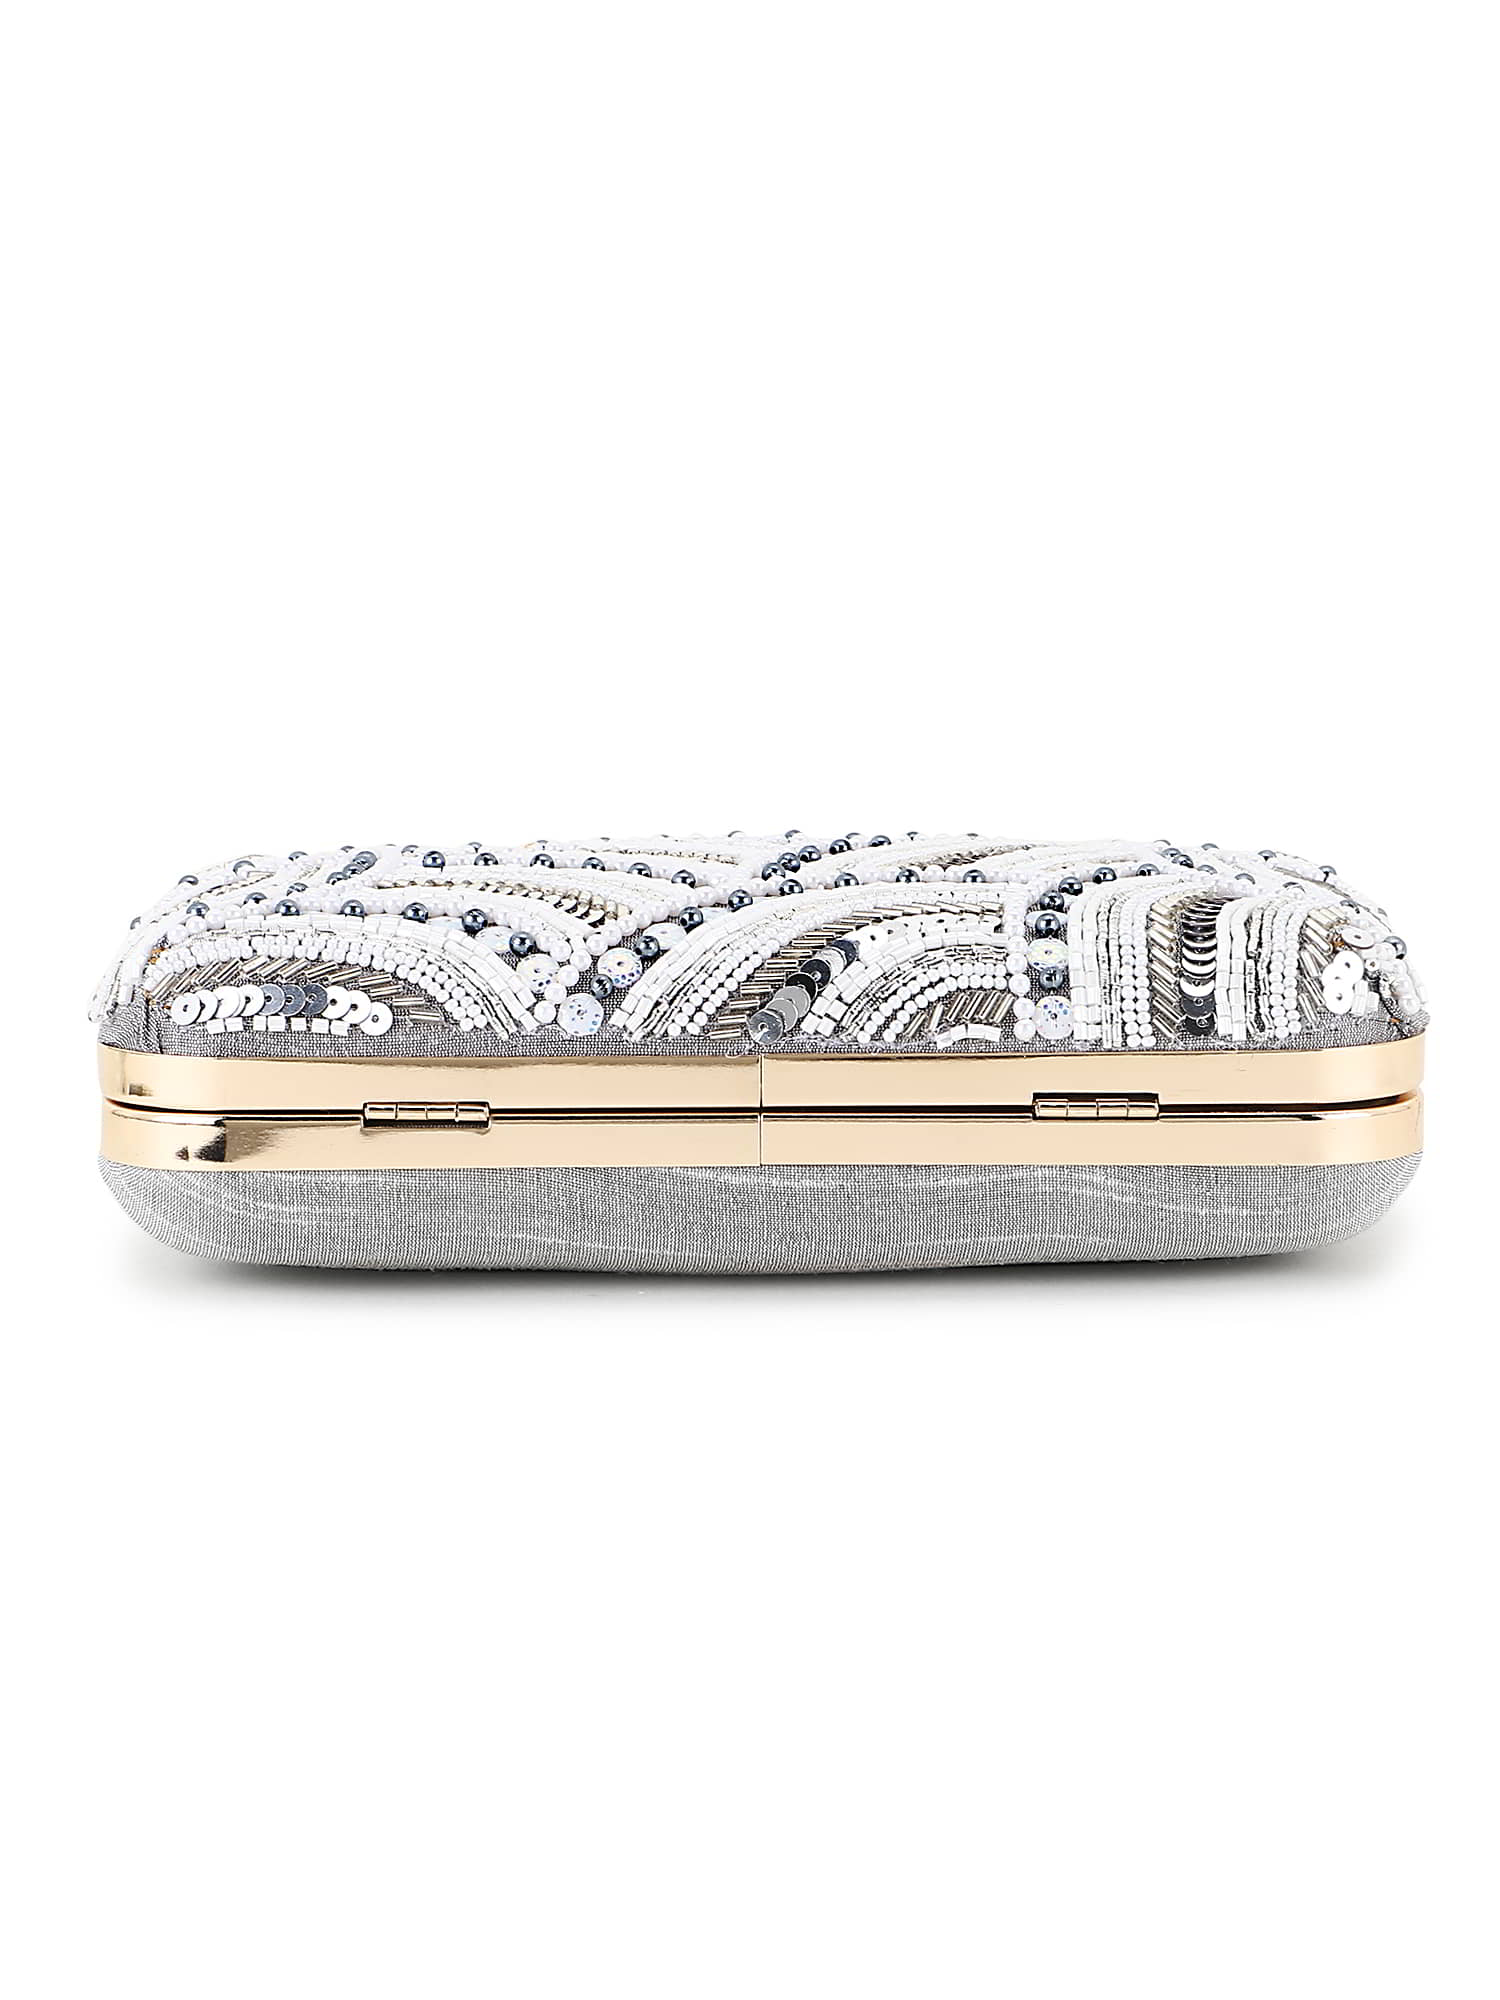 Adorn Abstract Embellished Faux Silk Clutch